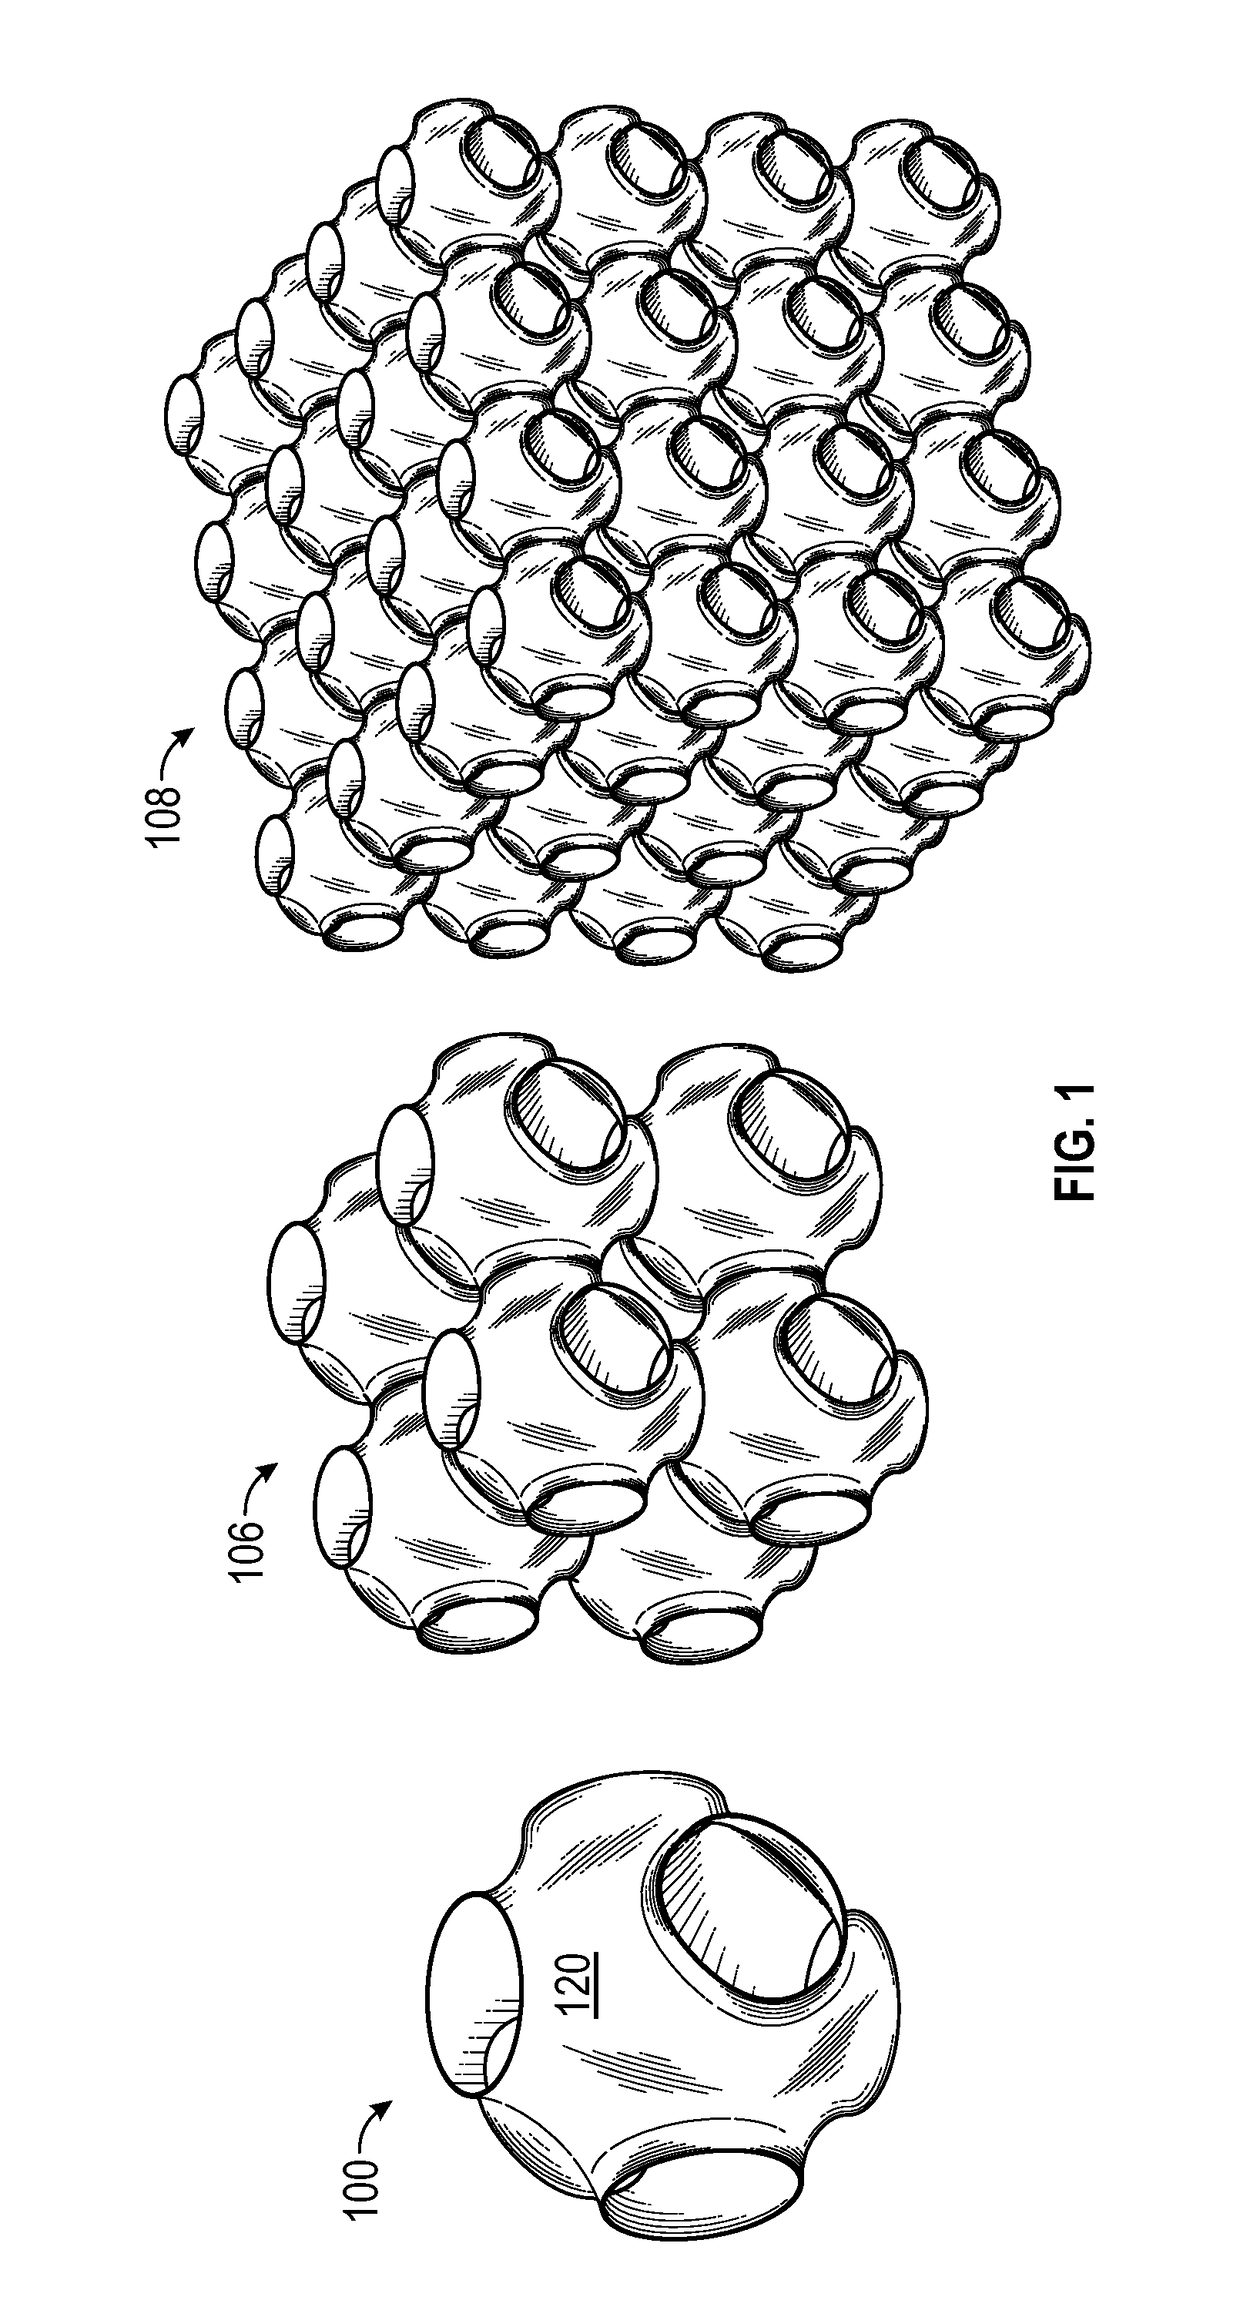 Monolithic Bicontinuous Labyrinth Structures and Methods For Their Manufacture